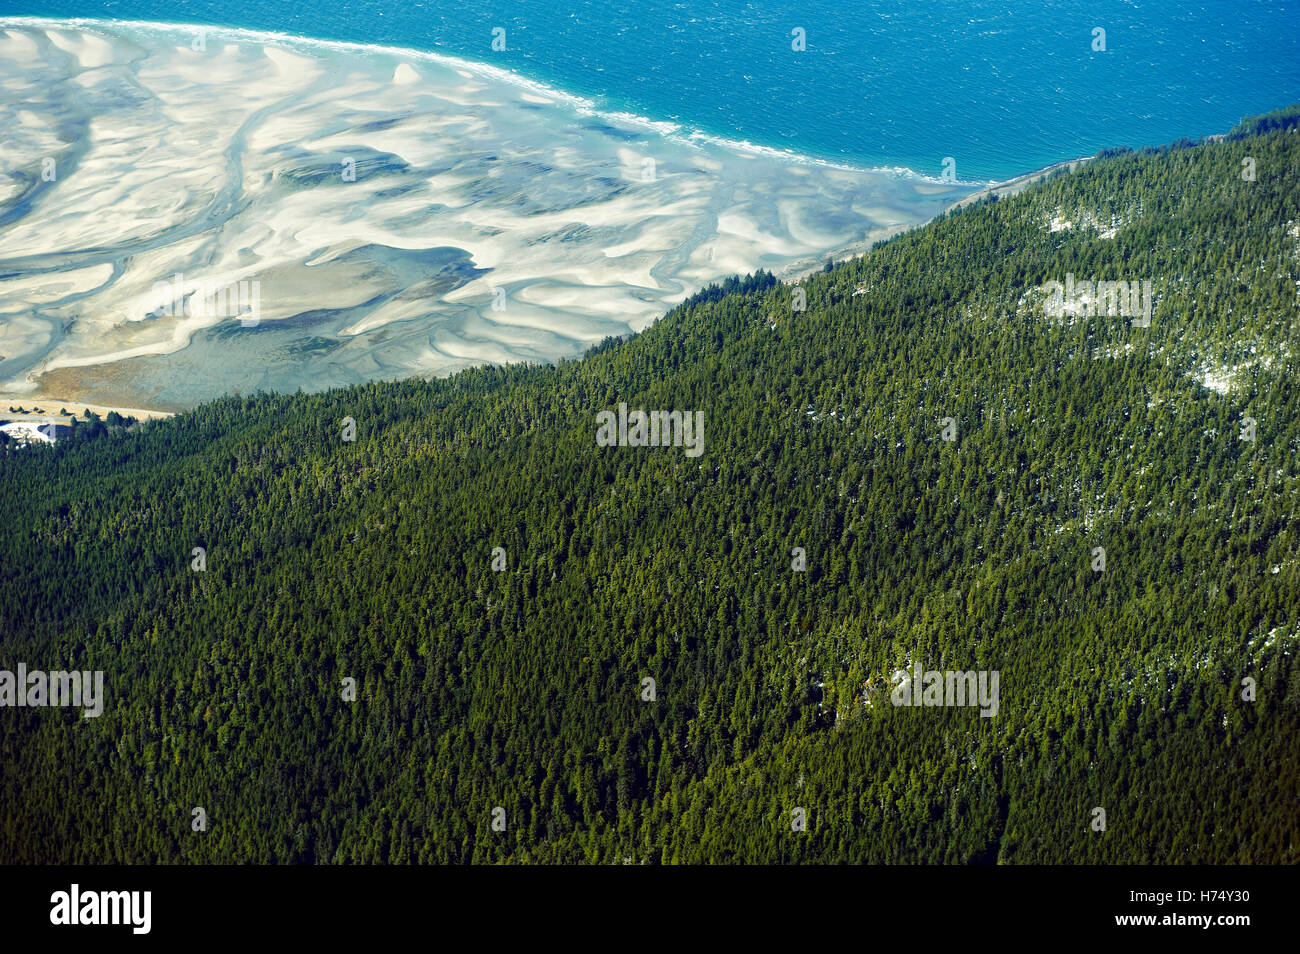 An aerial view of the Chilkat Inlet and surrounding mountains between Haines and Juneau, AK. Stock Photo